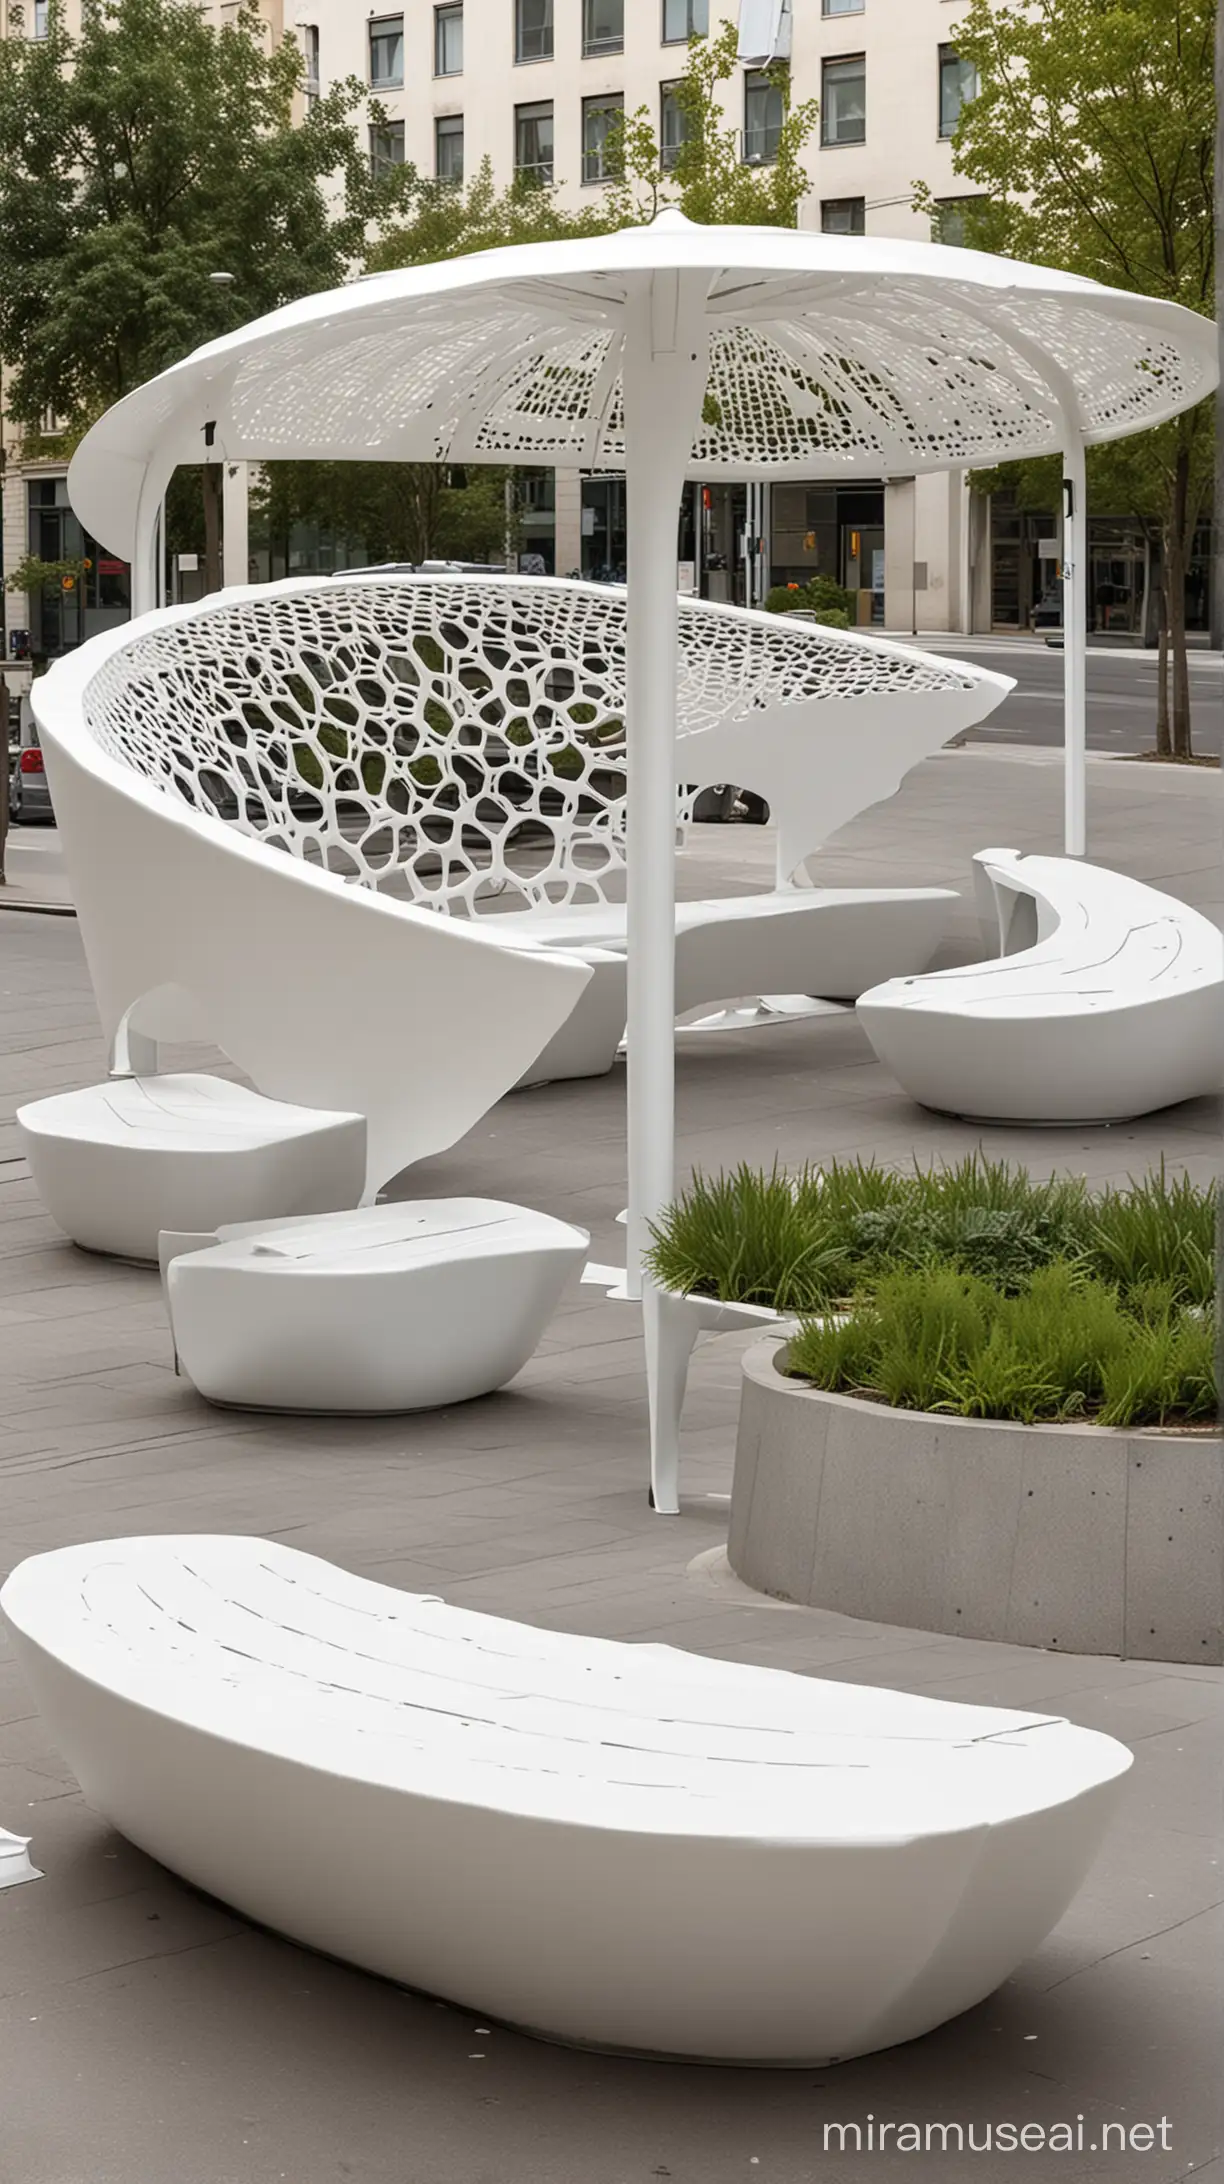 An urban furniture design with a bench and shade protection function. it must be futuristic and white coloured with plastic material. its appearance must be inspered by plants. it should have a circular structure.